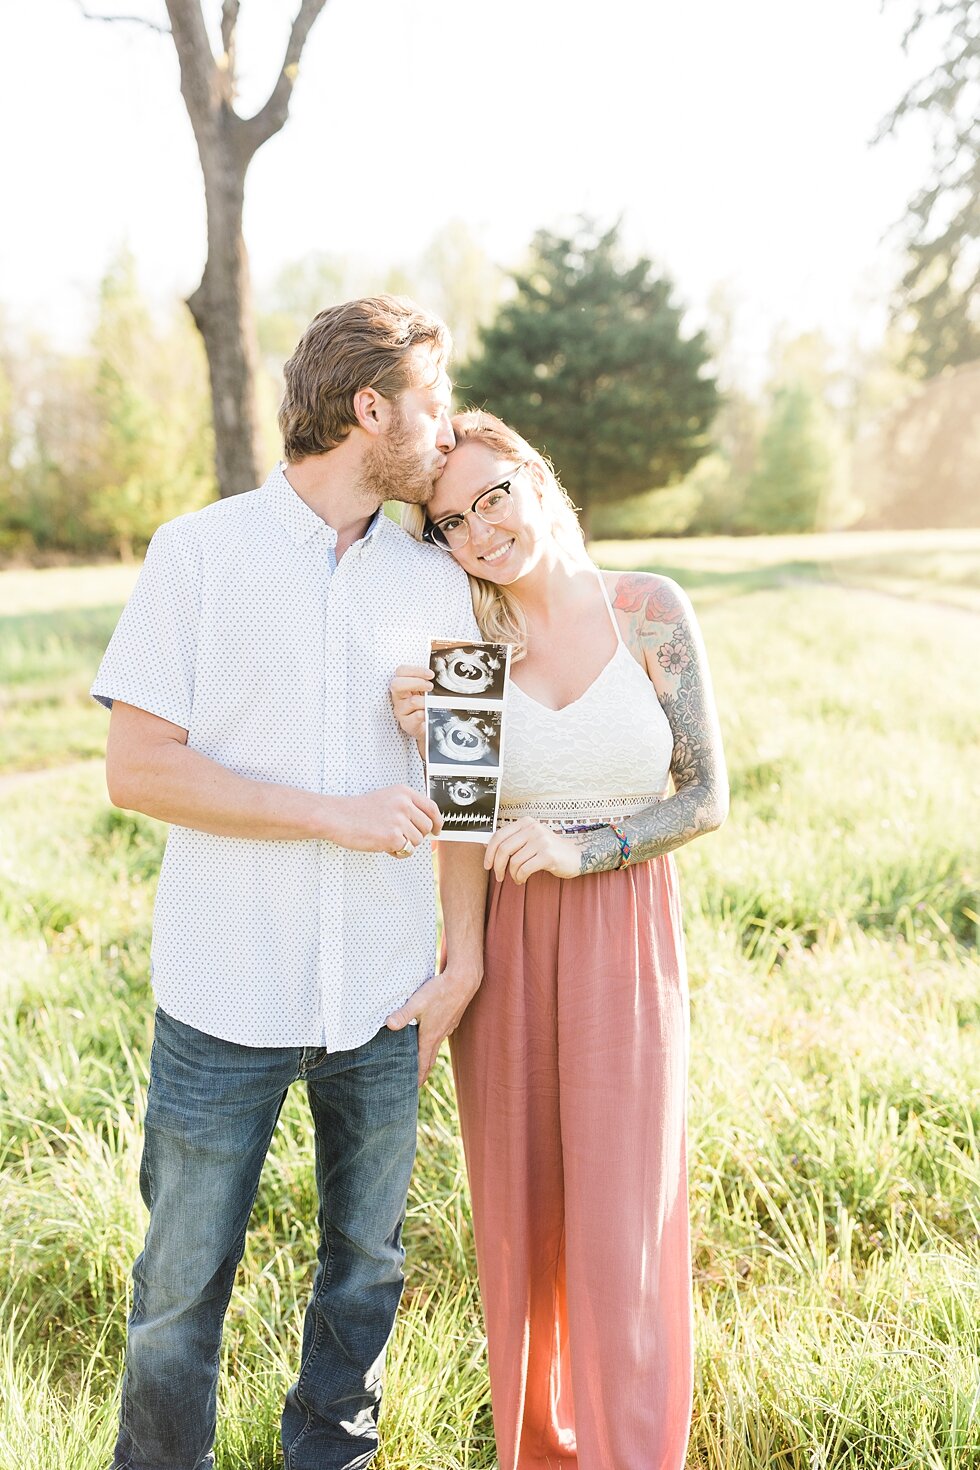  Kiss on the forehead as this couple shares their excitement and big news about having a baby on the way! ultrasound announcement for a southern spring session. couple baby on the way expecting excited maternity photography congratulations announceme